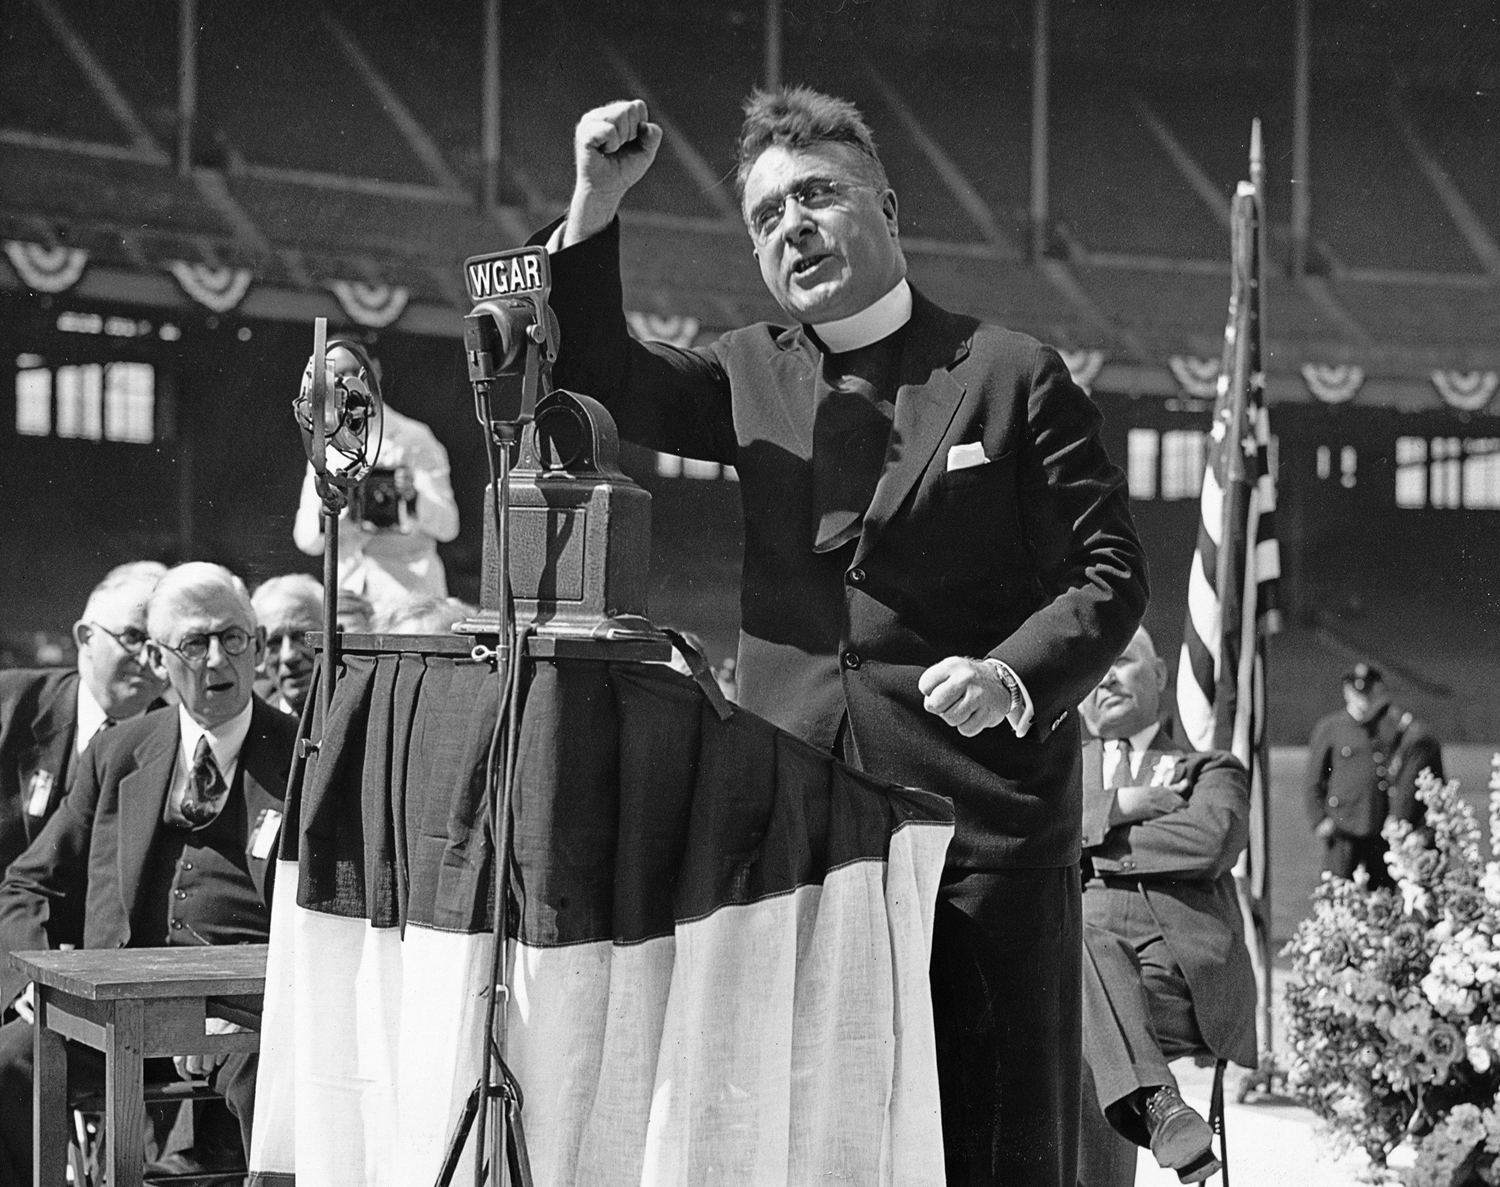 Father Charles Coughlin, the popular "radio priest" of the 1930s, was known for his virulent anti-Semitic rhetoric.